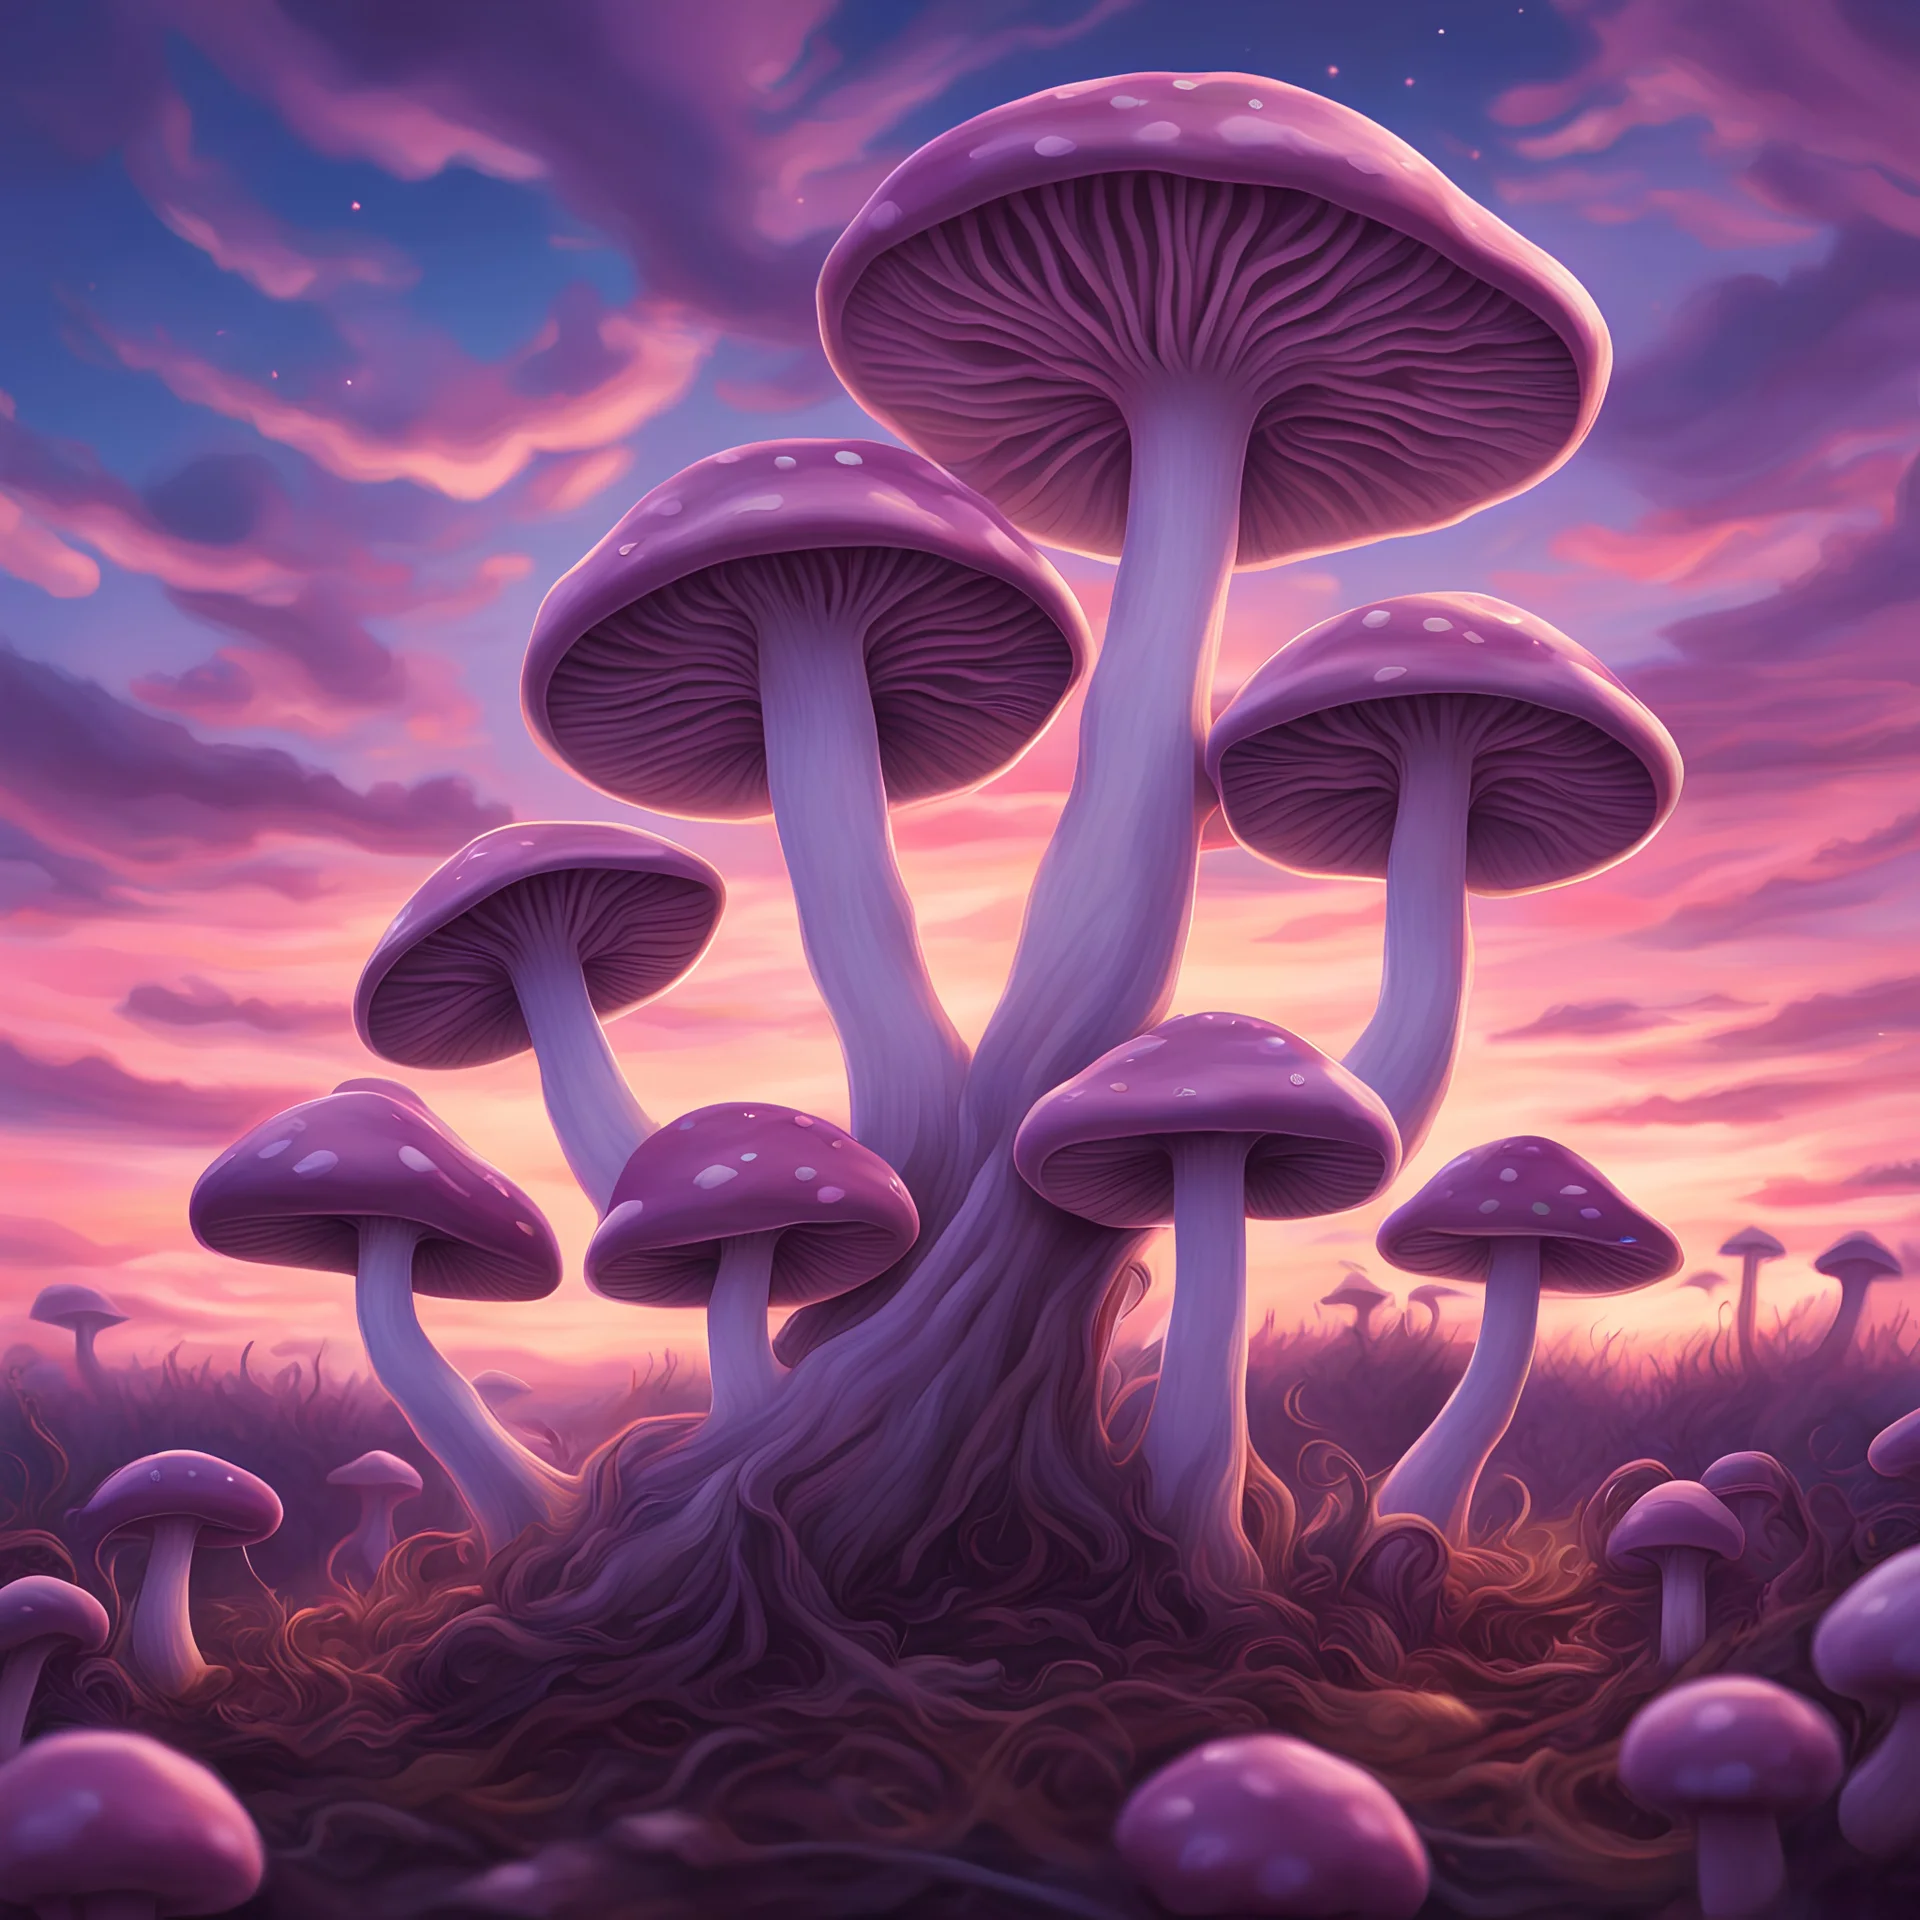 Mauve mushrooms entwined together under a brilliant dusk sky, in vibrant art style